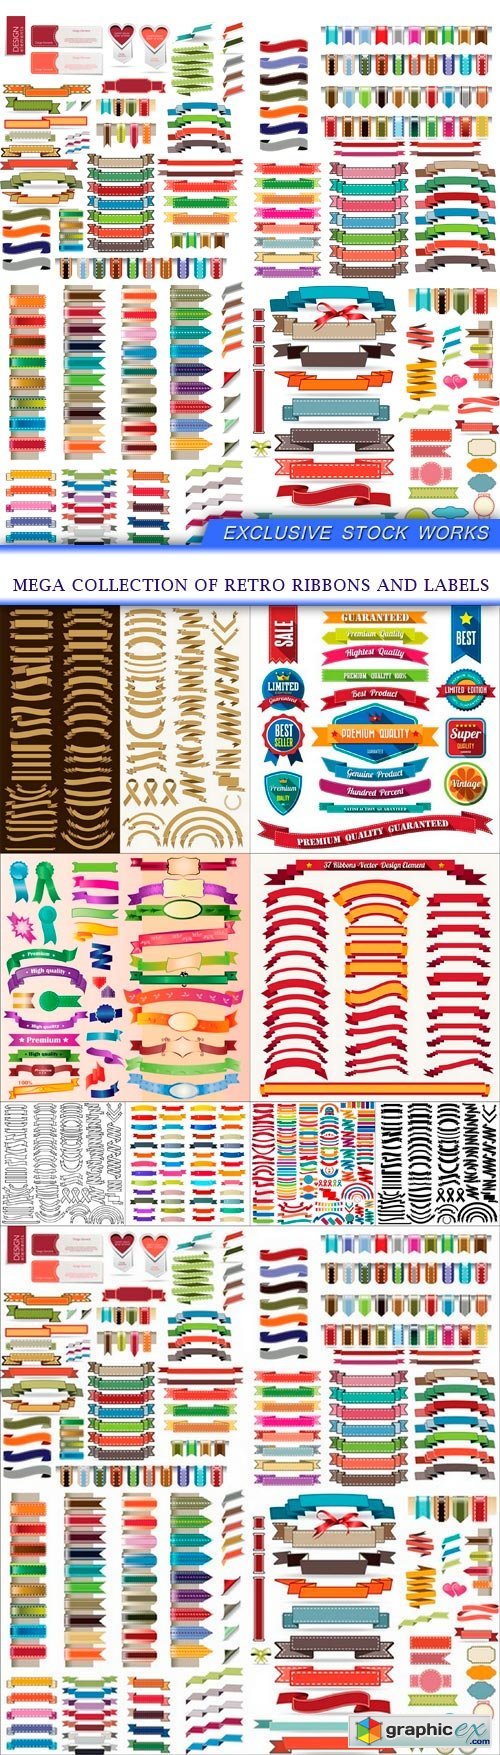 Mega collection of retro ribbons and labels 9x EPS